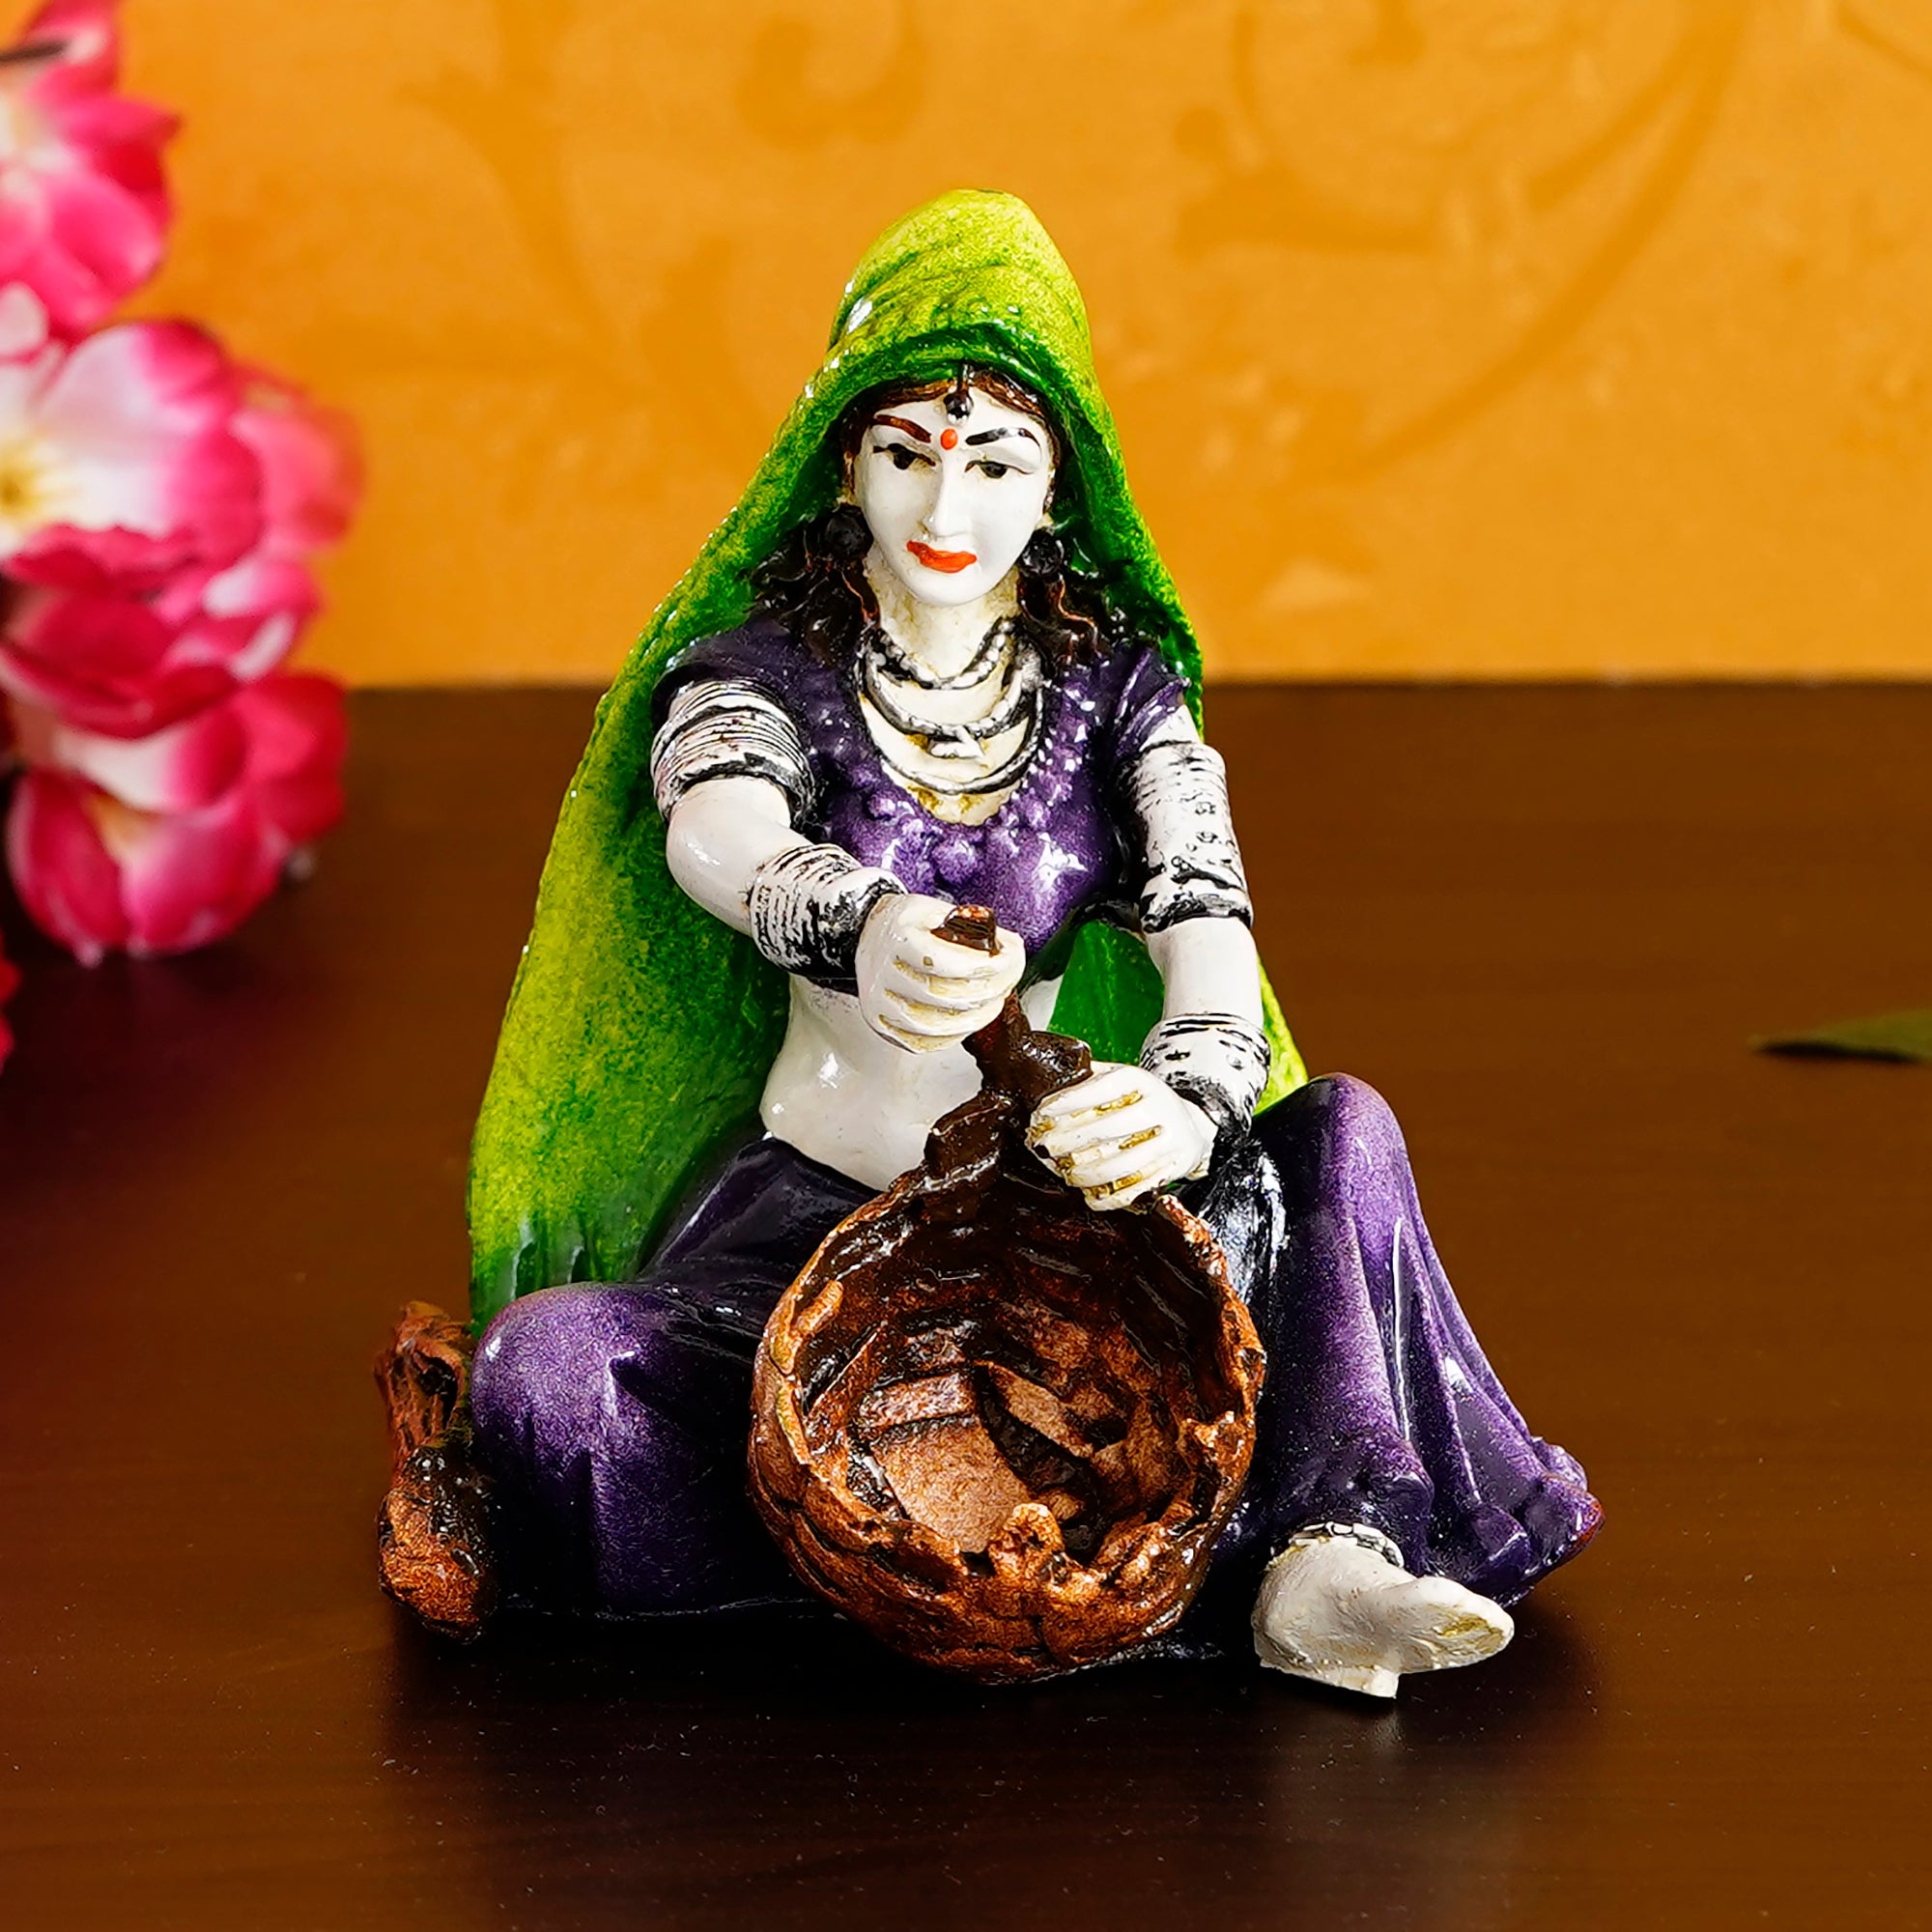 Polyresin Rajasthani Lady Creating Craft Product Handcrafted Human Figurine Decorative Showpiece